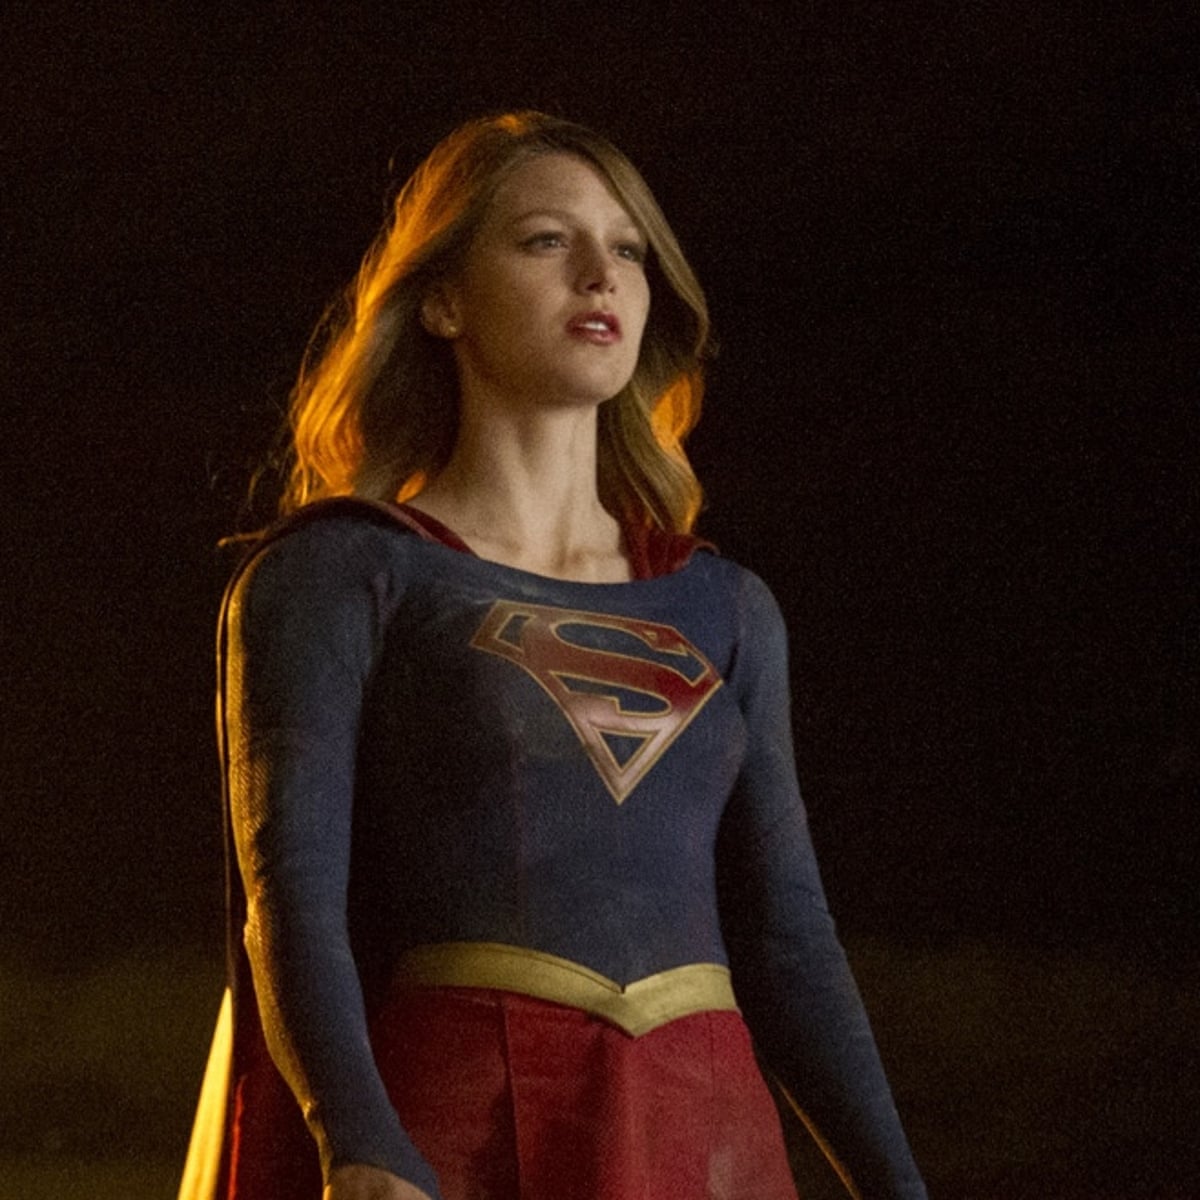 DC disaster: can Supergirl save the universe for Warner Bros? | Superhero  movies | The Guardian